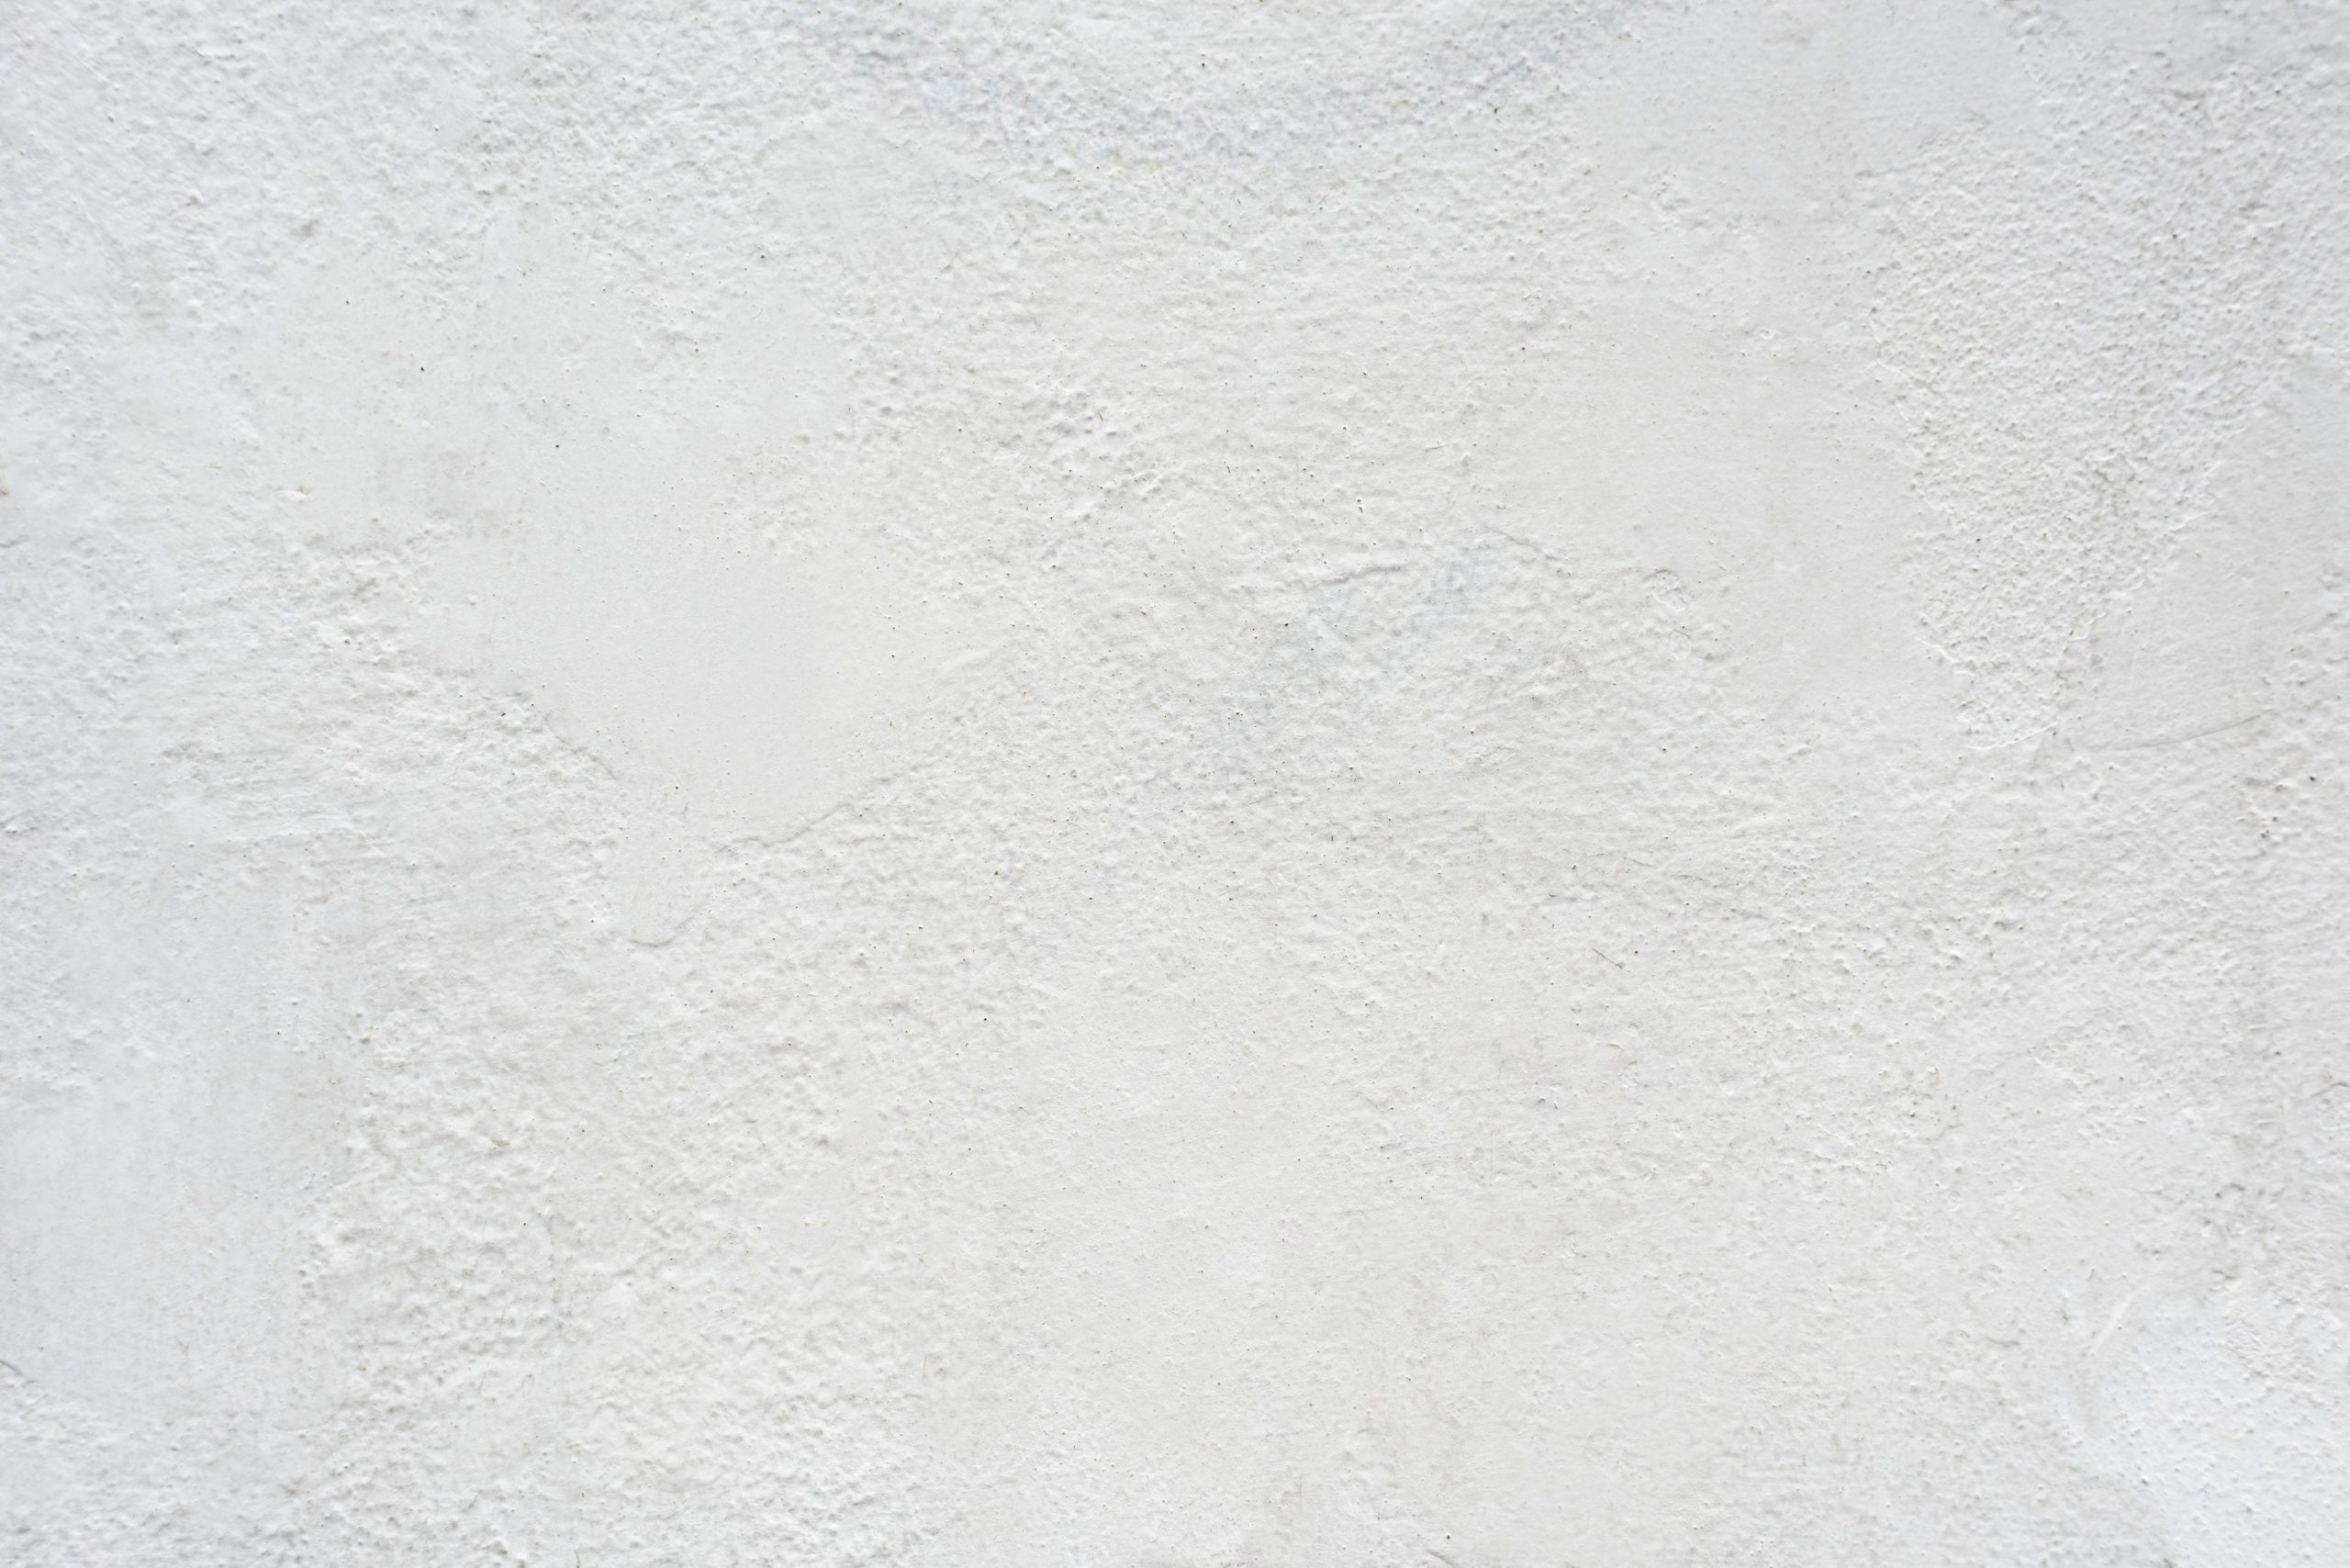 What to Consider Before Painting Drywall